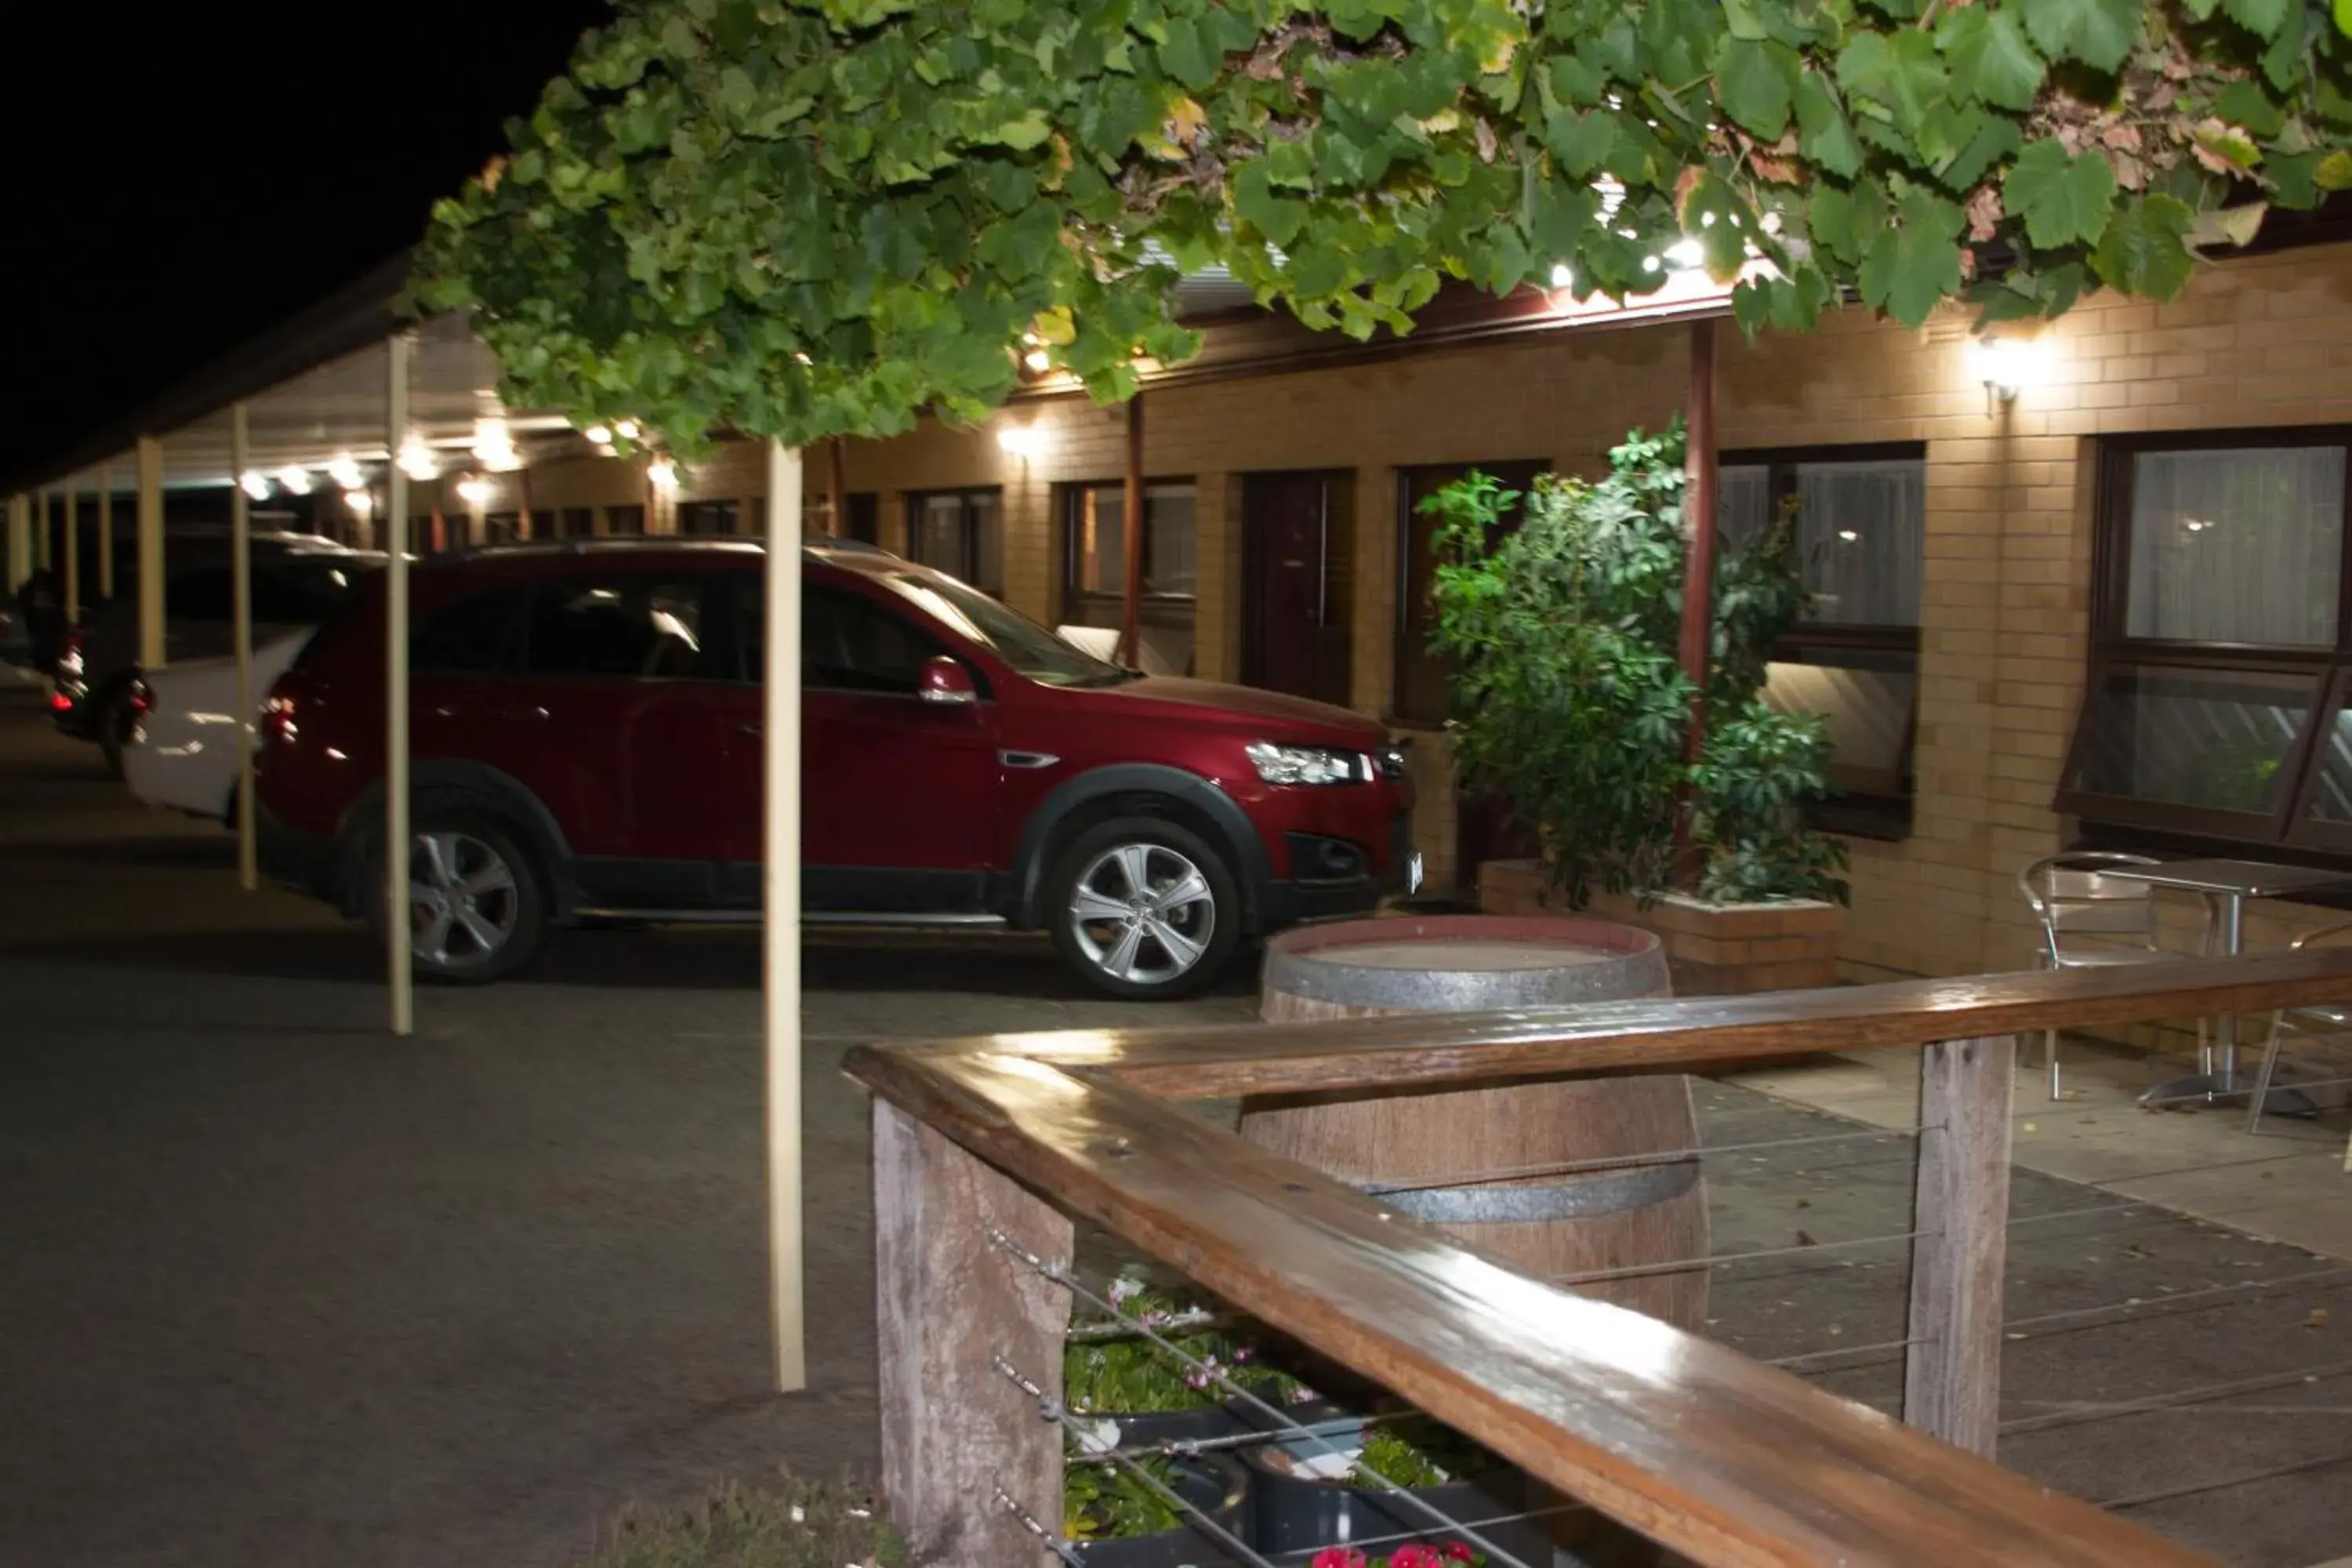 Area and facilities in Angaston Vineyards Motel